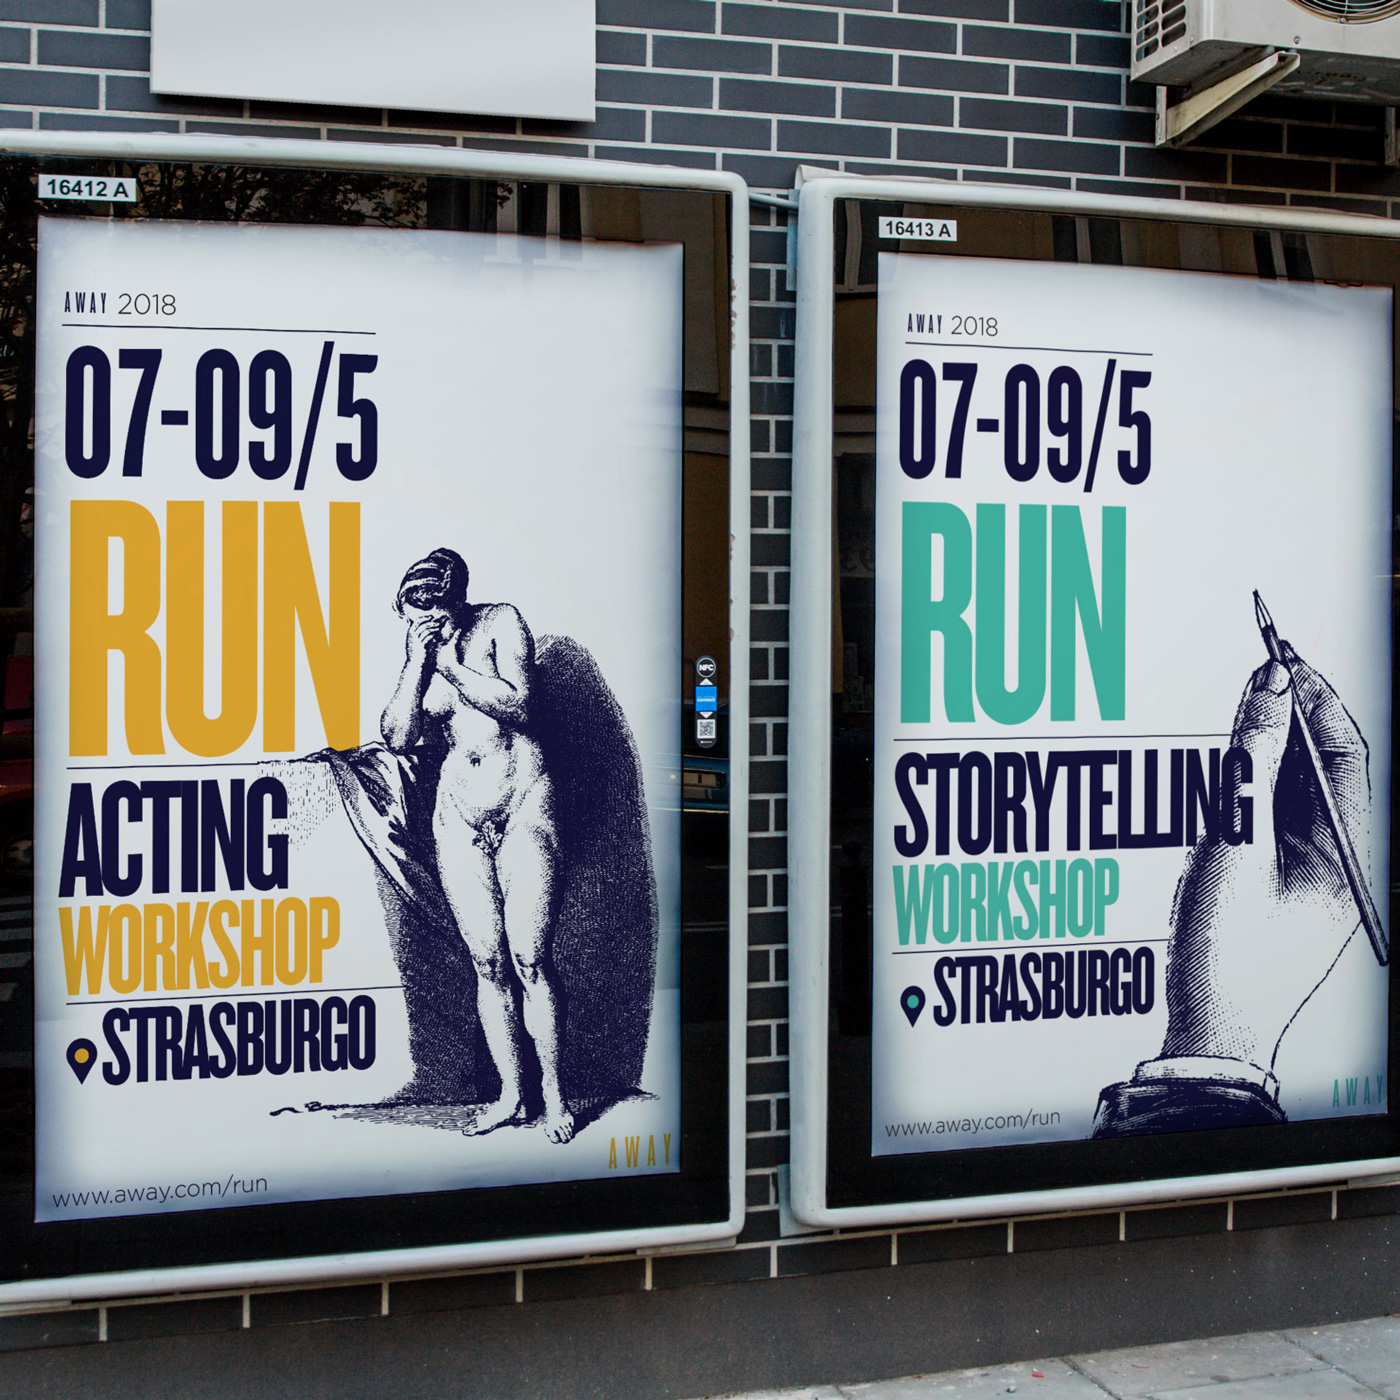 advertising poster of acting and storytelling workshops